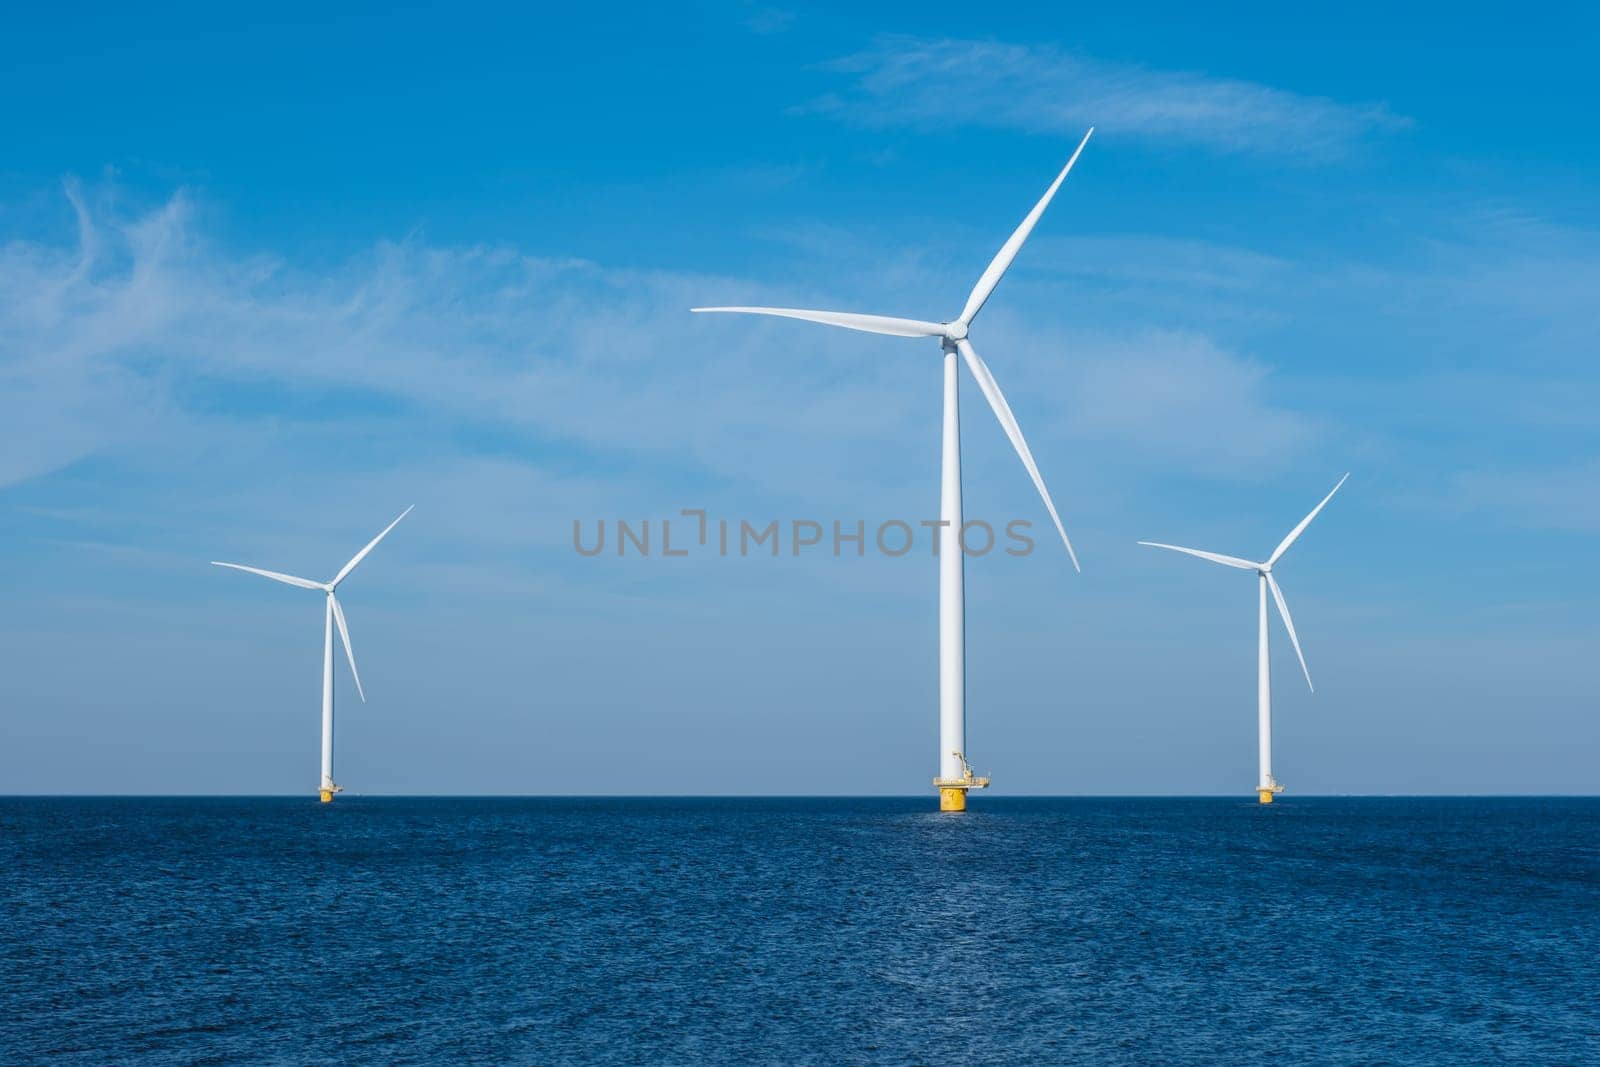 A group of elegant wind turbines stands tall in the ocean in the Netherlands Flevoland, harnessing the power of the wind to generate renewable energy. Windmill turbines at sea,